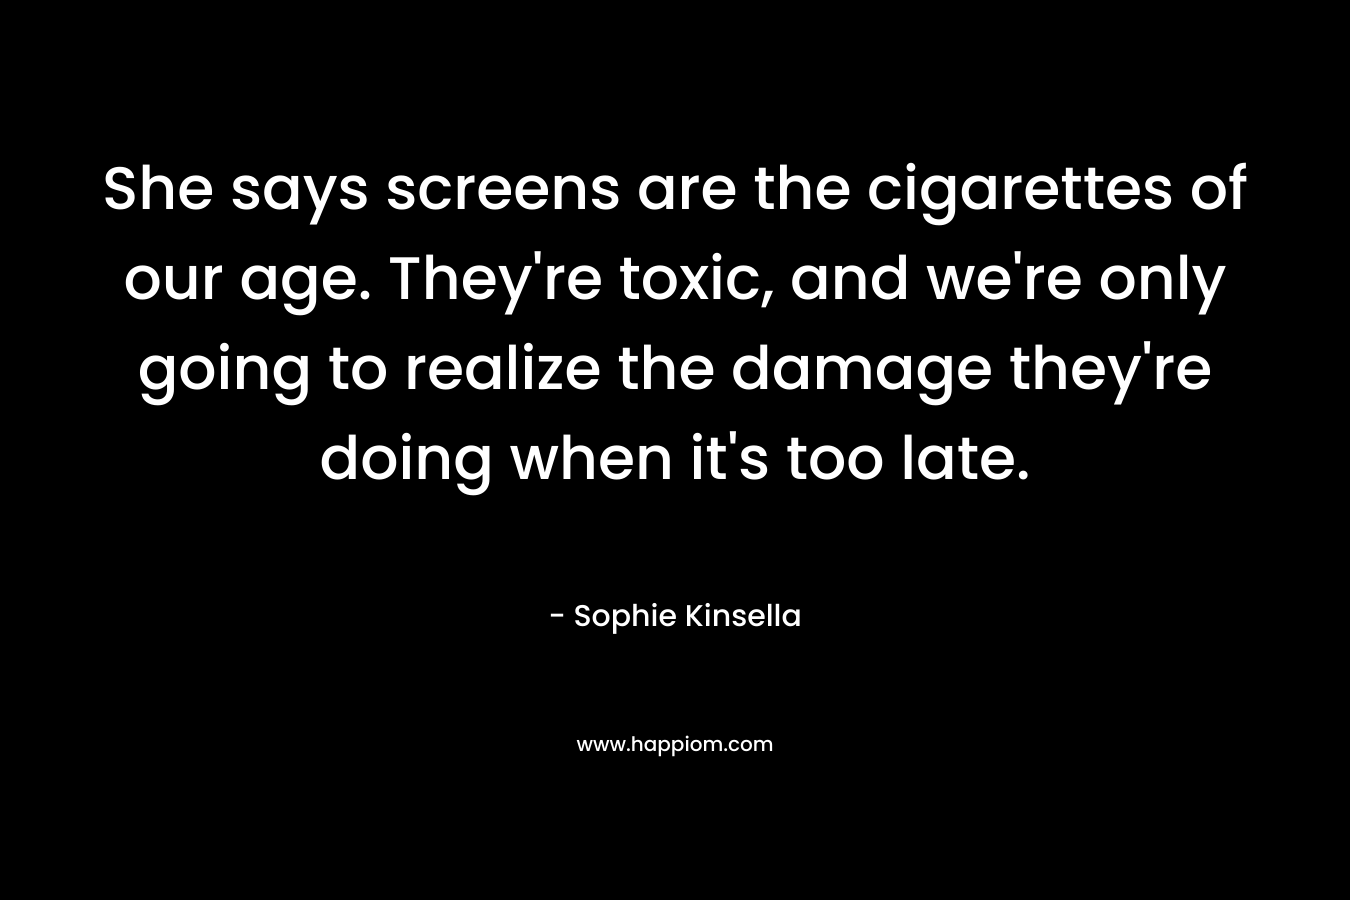 She says screens are the cigarettes of our age. They’re toxic, and we’re only going to realize the damage they’re doing when it’s too late. – Sophie Kinsella